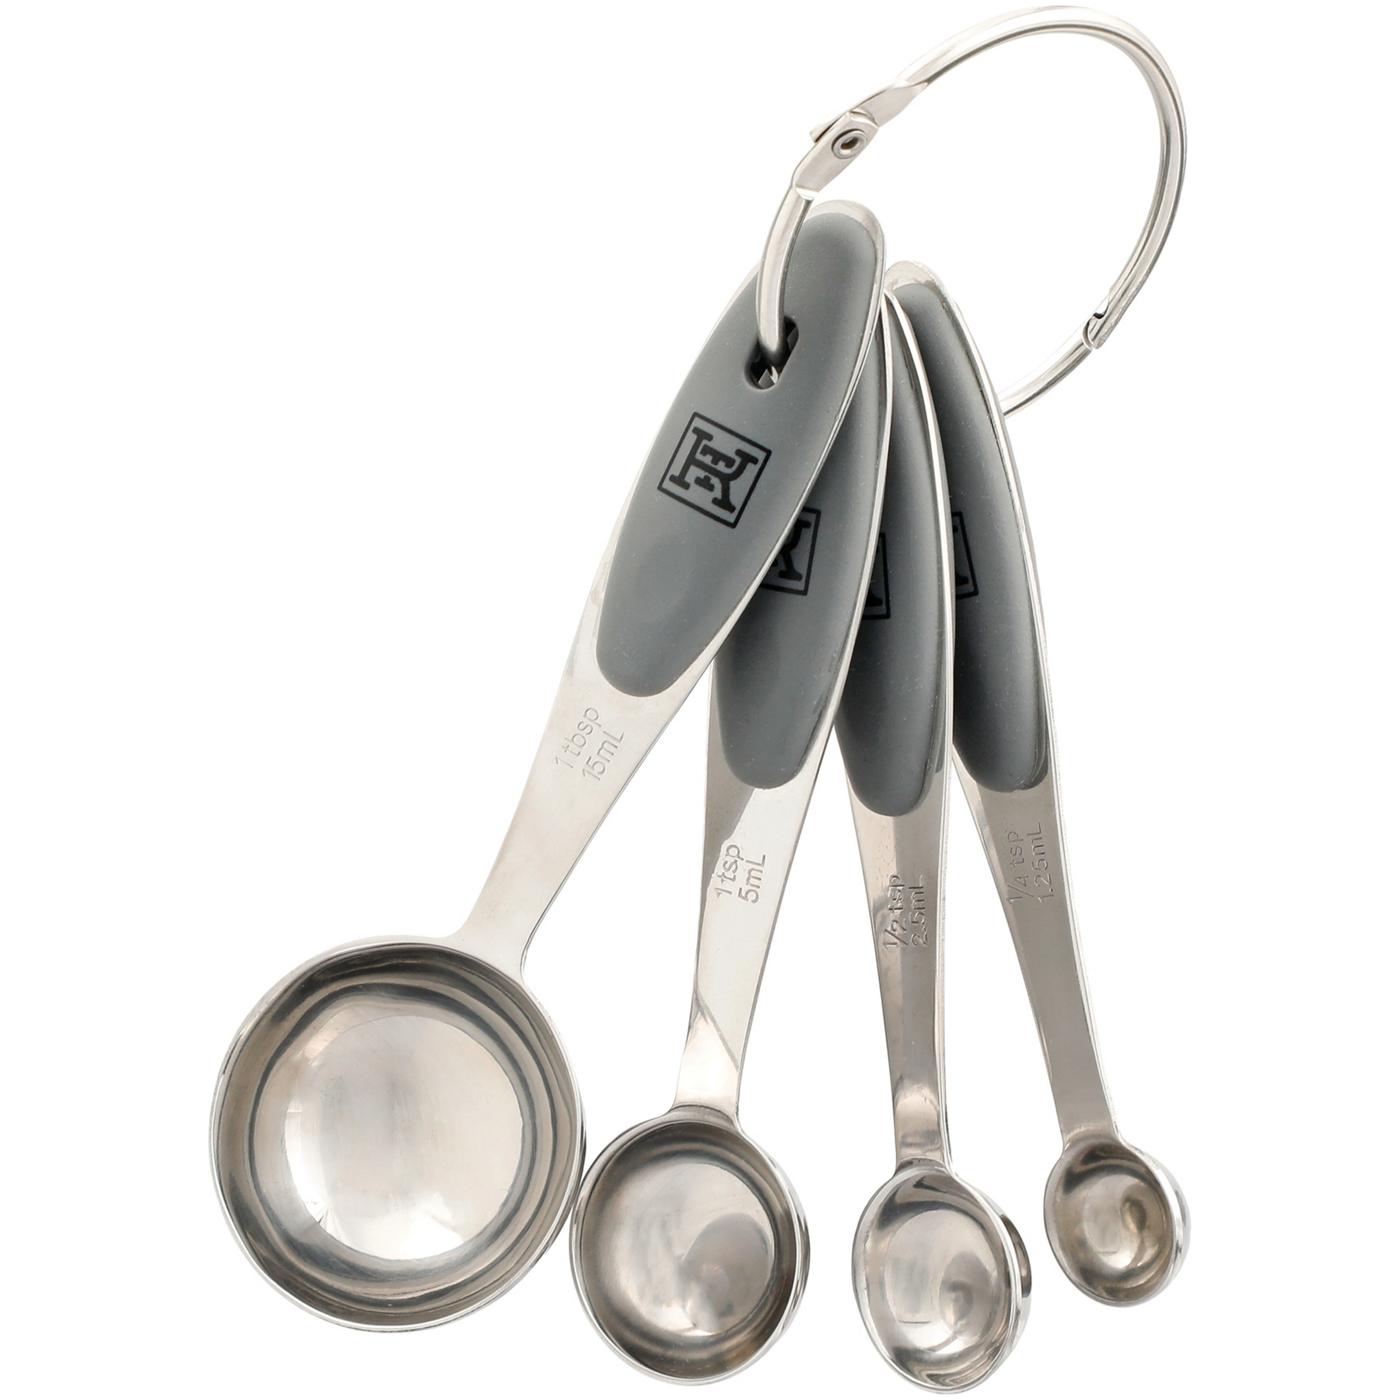 Kitchen & Table by H-E-B Measuring Spoon Set; image 1 of 2